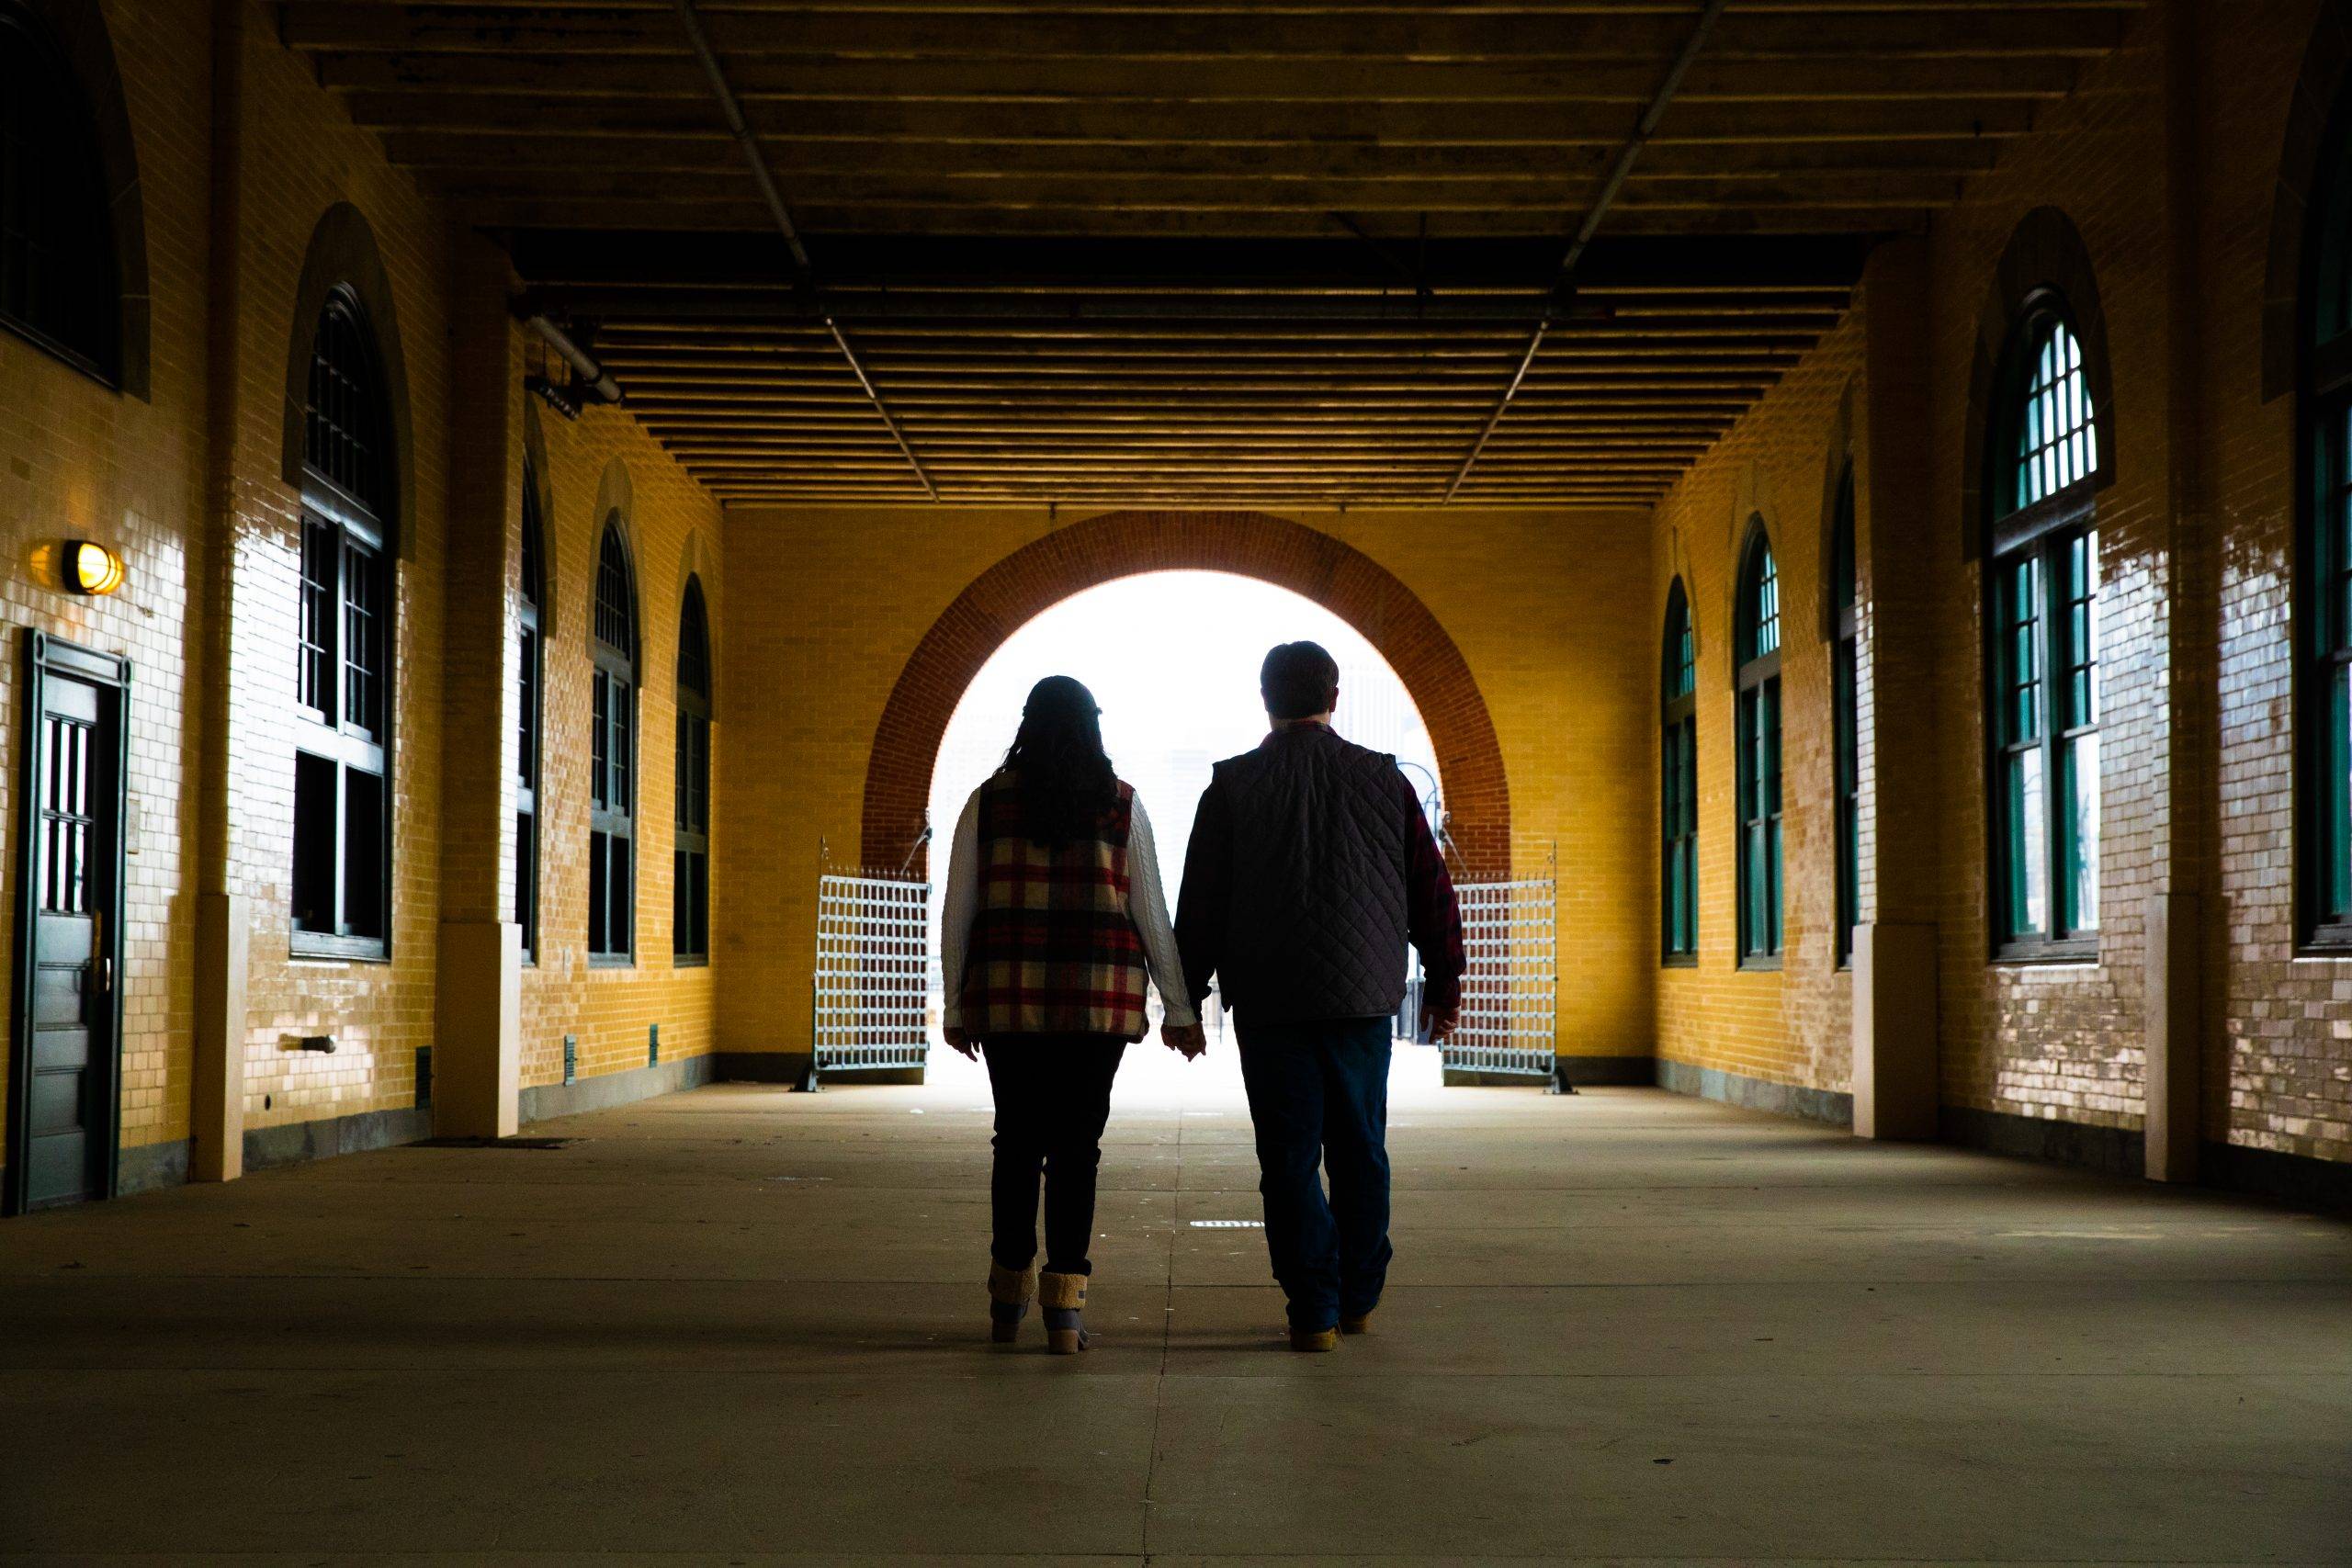 A couple walking down a hallway in an old building.